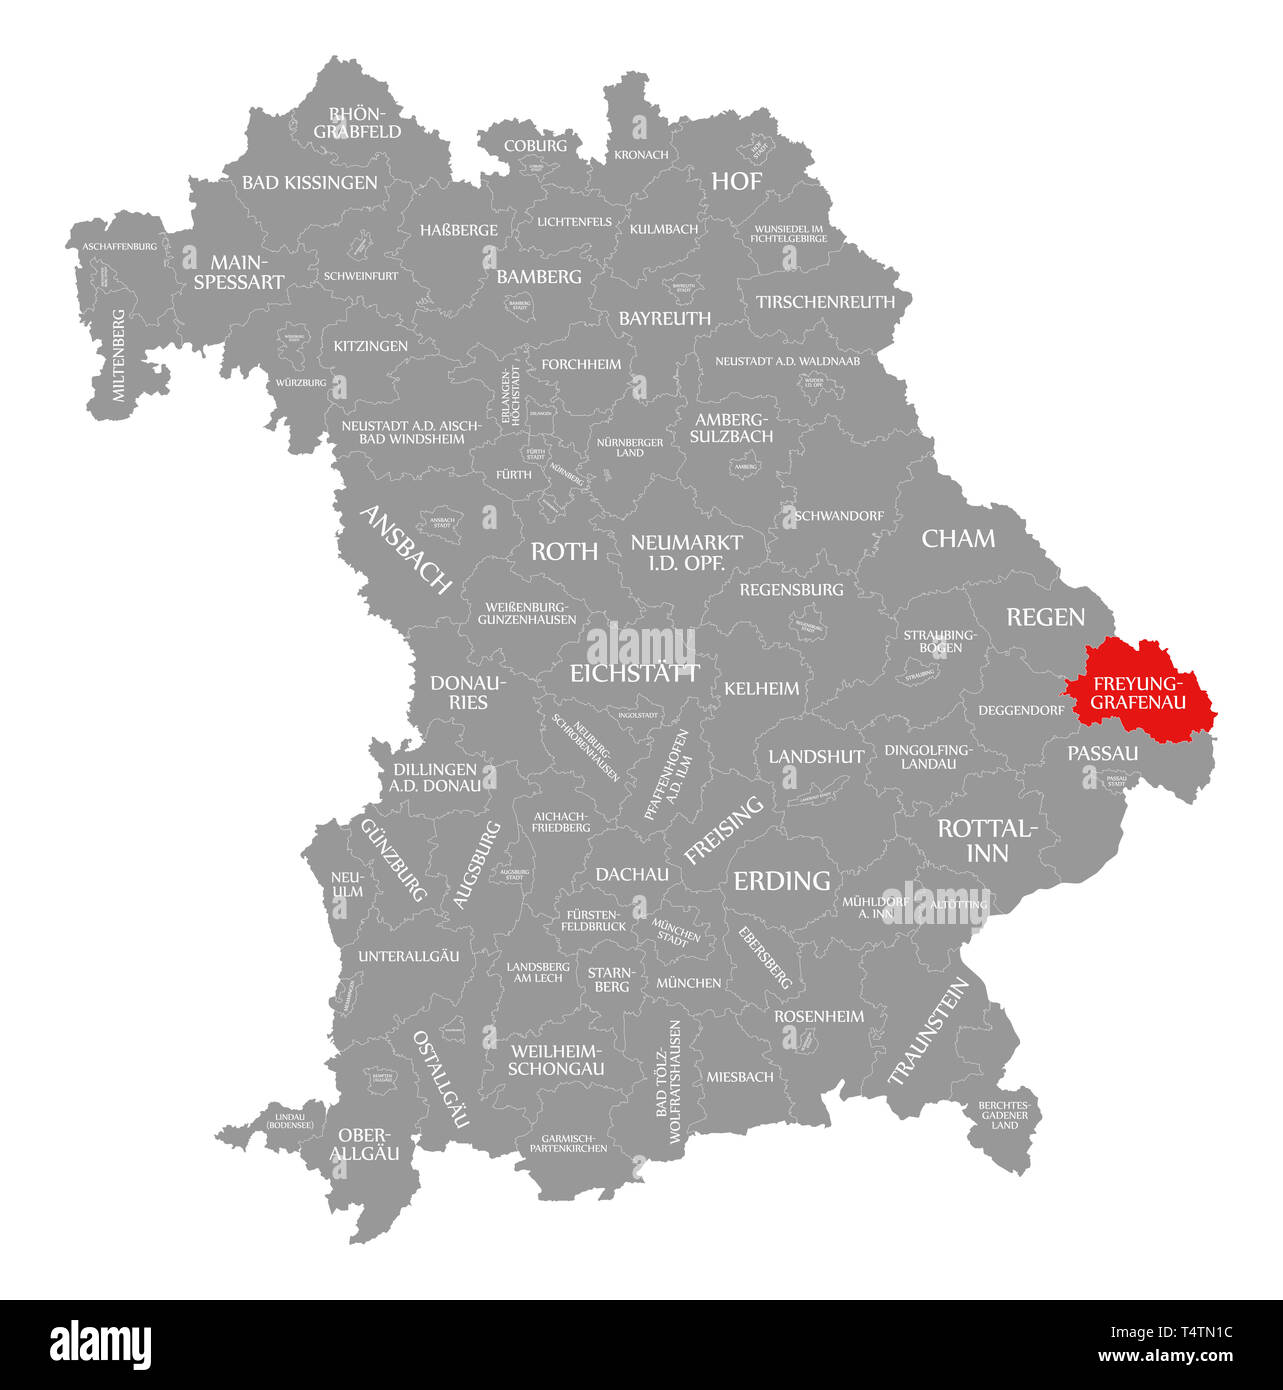 Freyung-Grafenau county red highlighted in map of Bavaria Germany Stock Photo